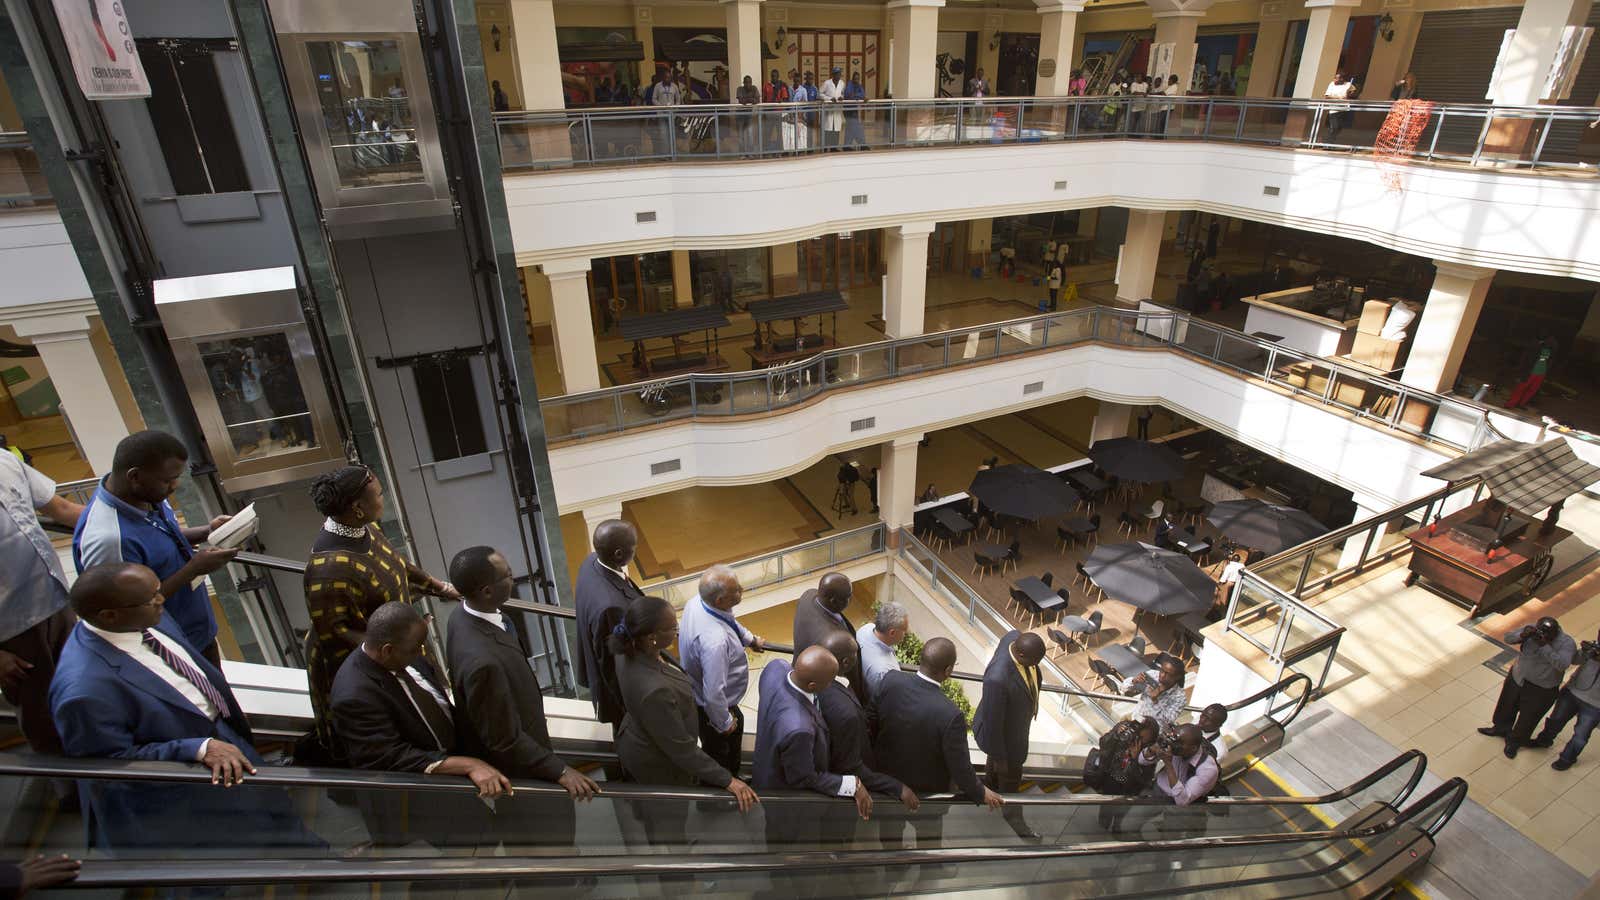 Kenya’s Westgate Mall reopened to much local fanfare